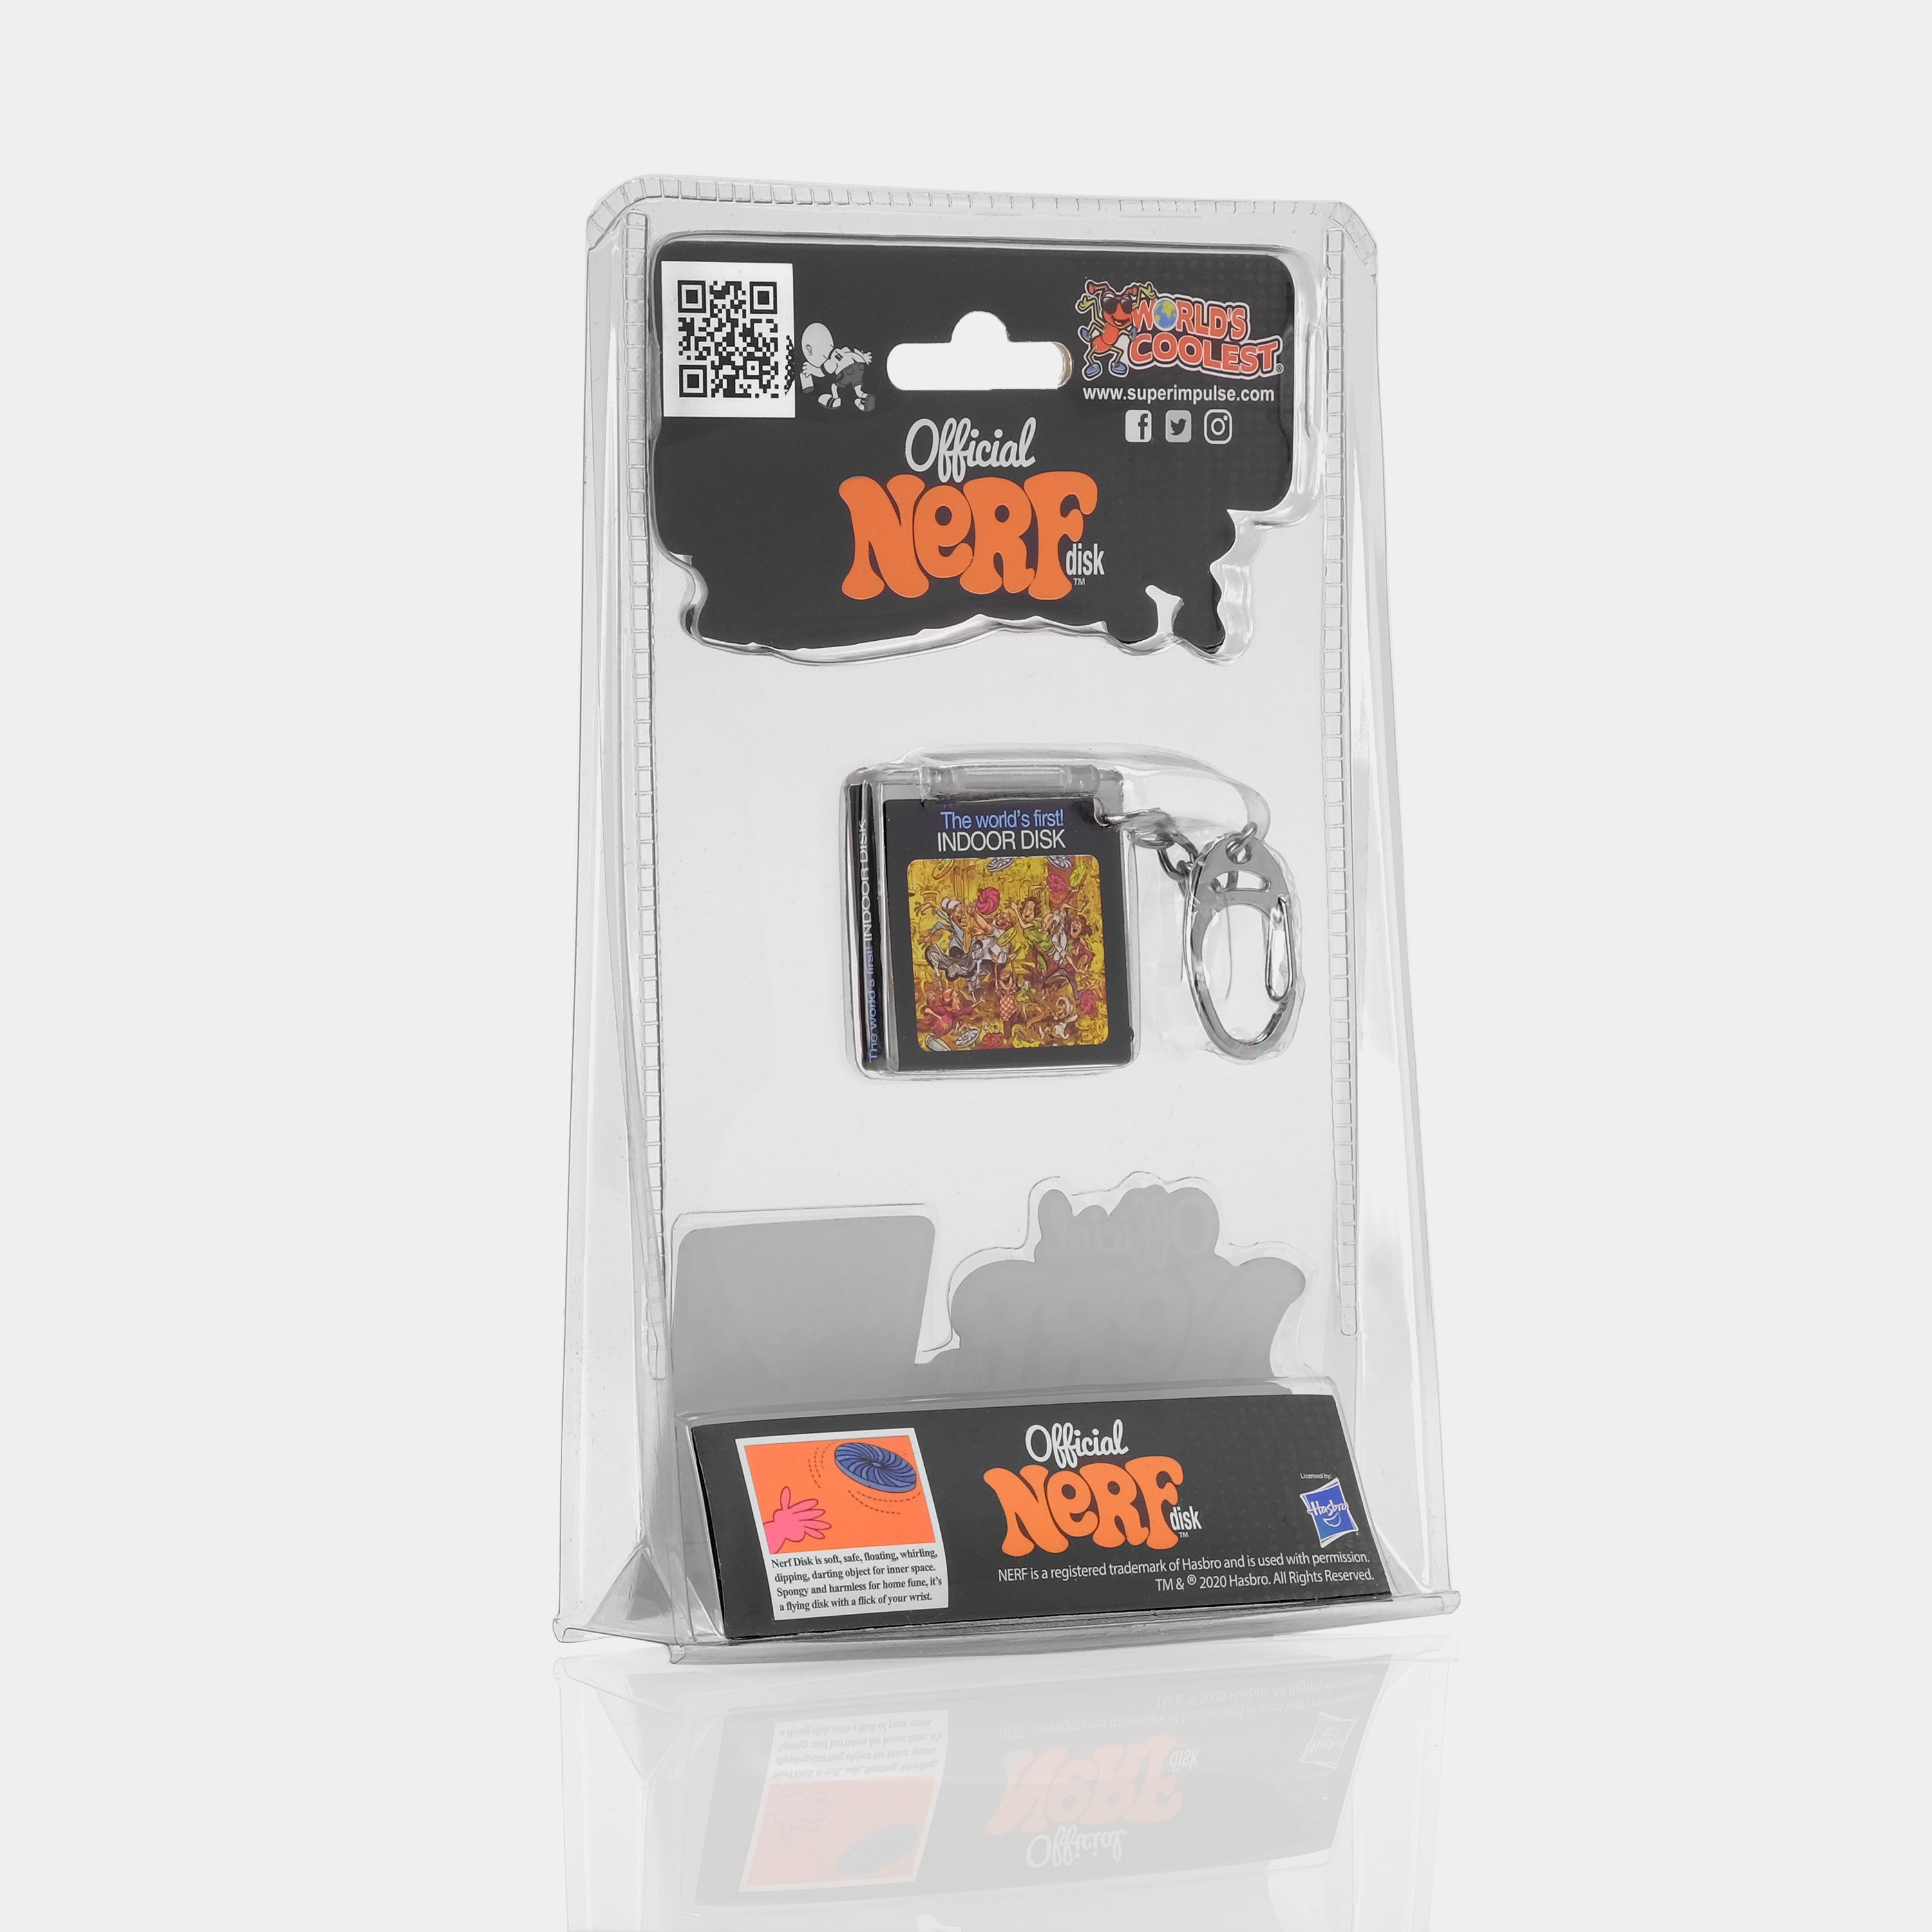 World's Coolest Official Nerf Disk Keychain